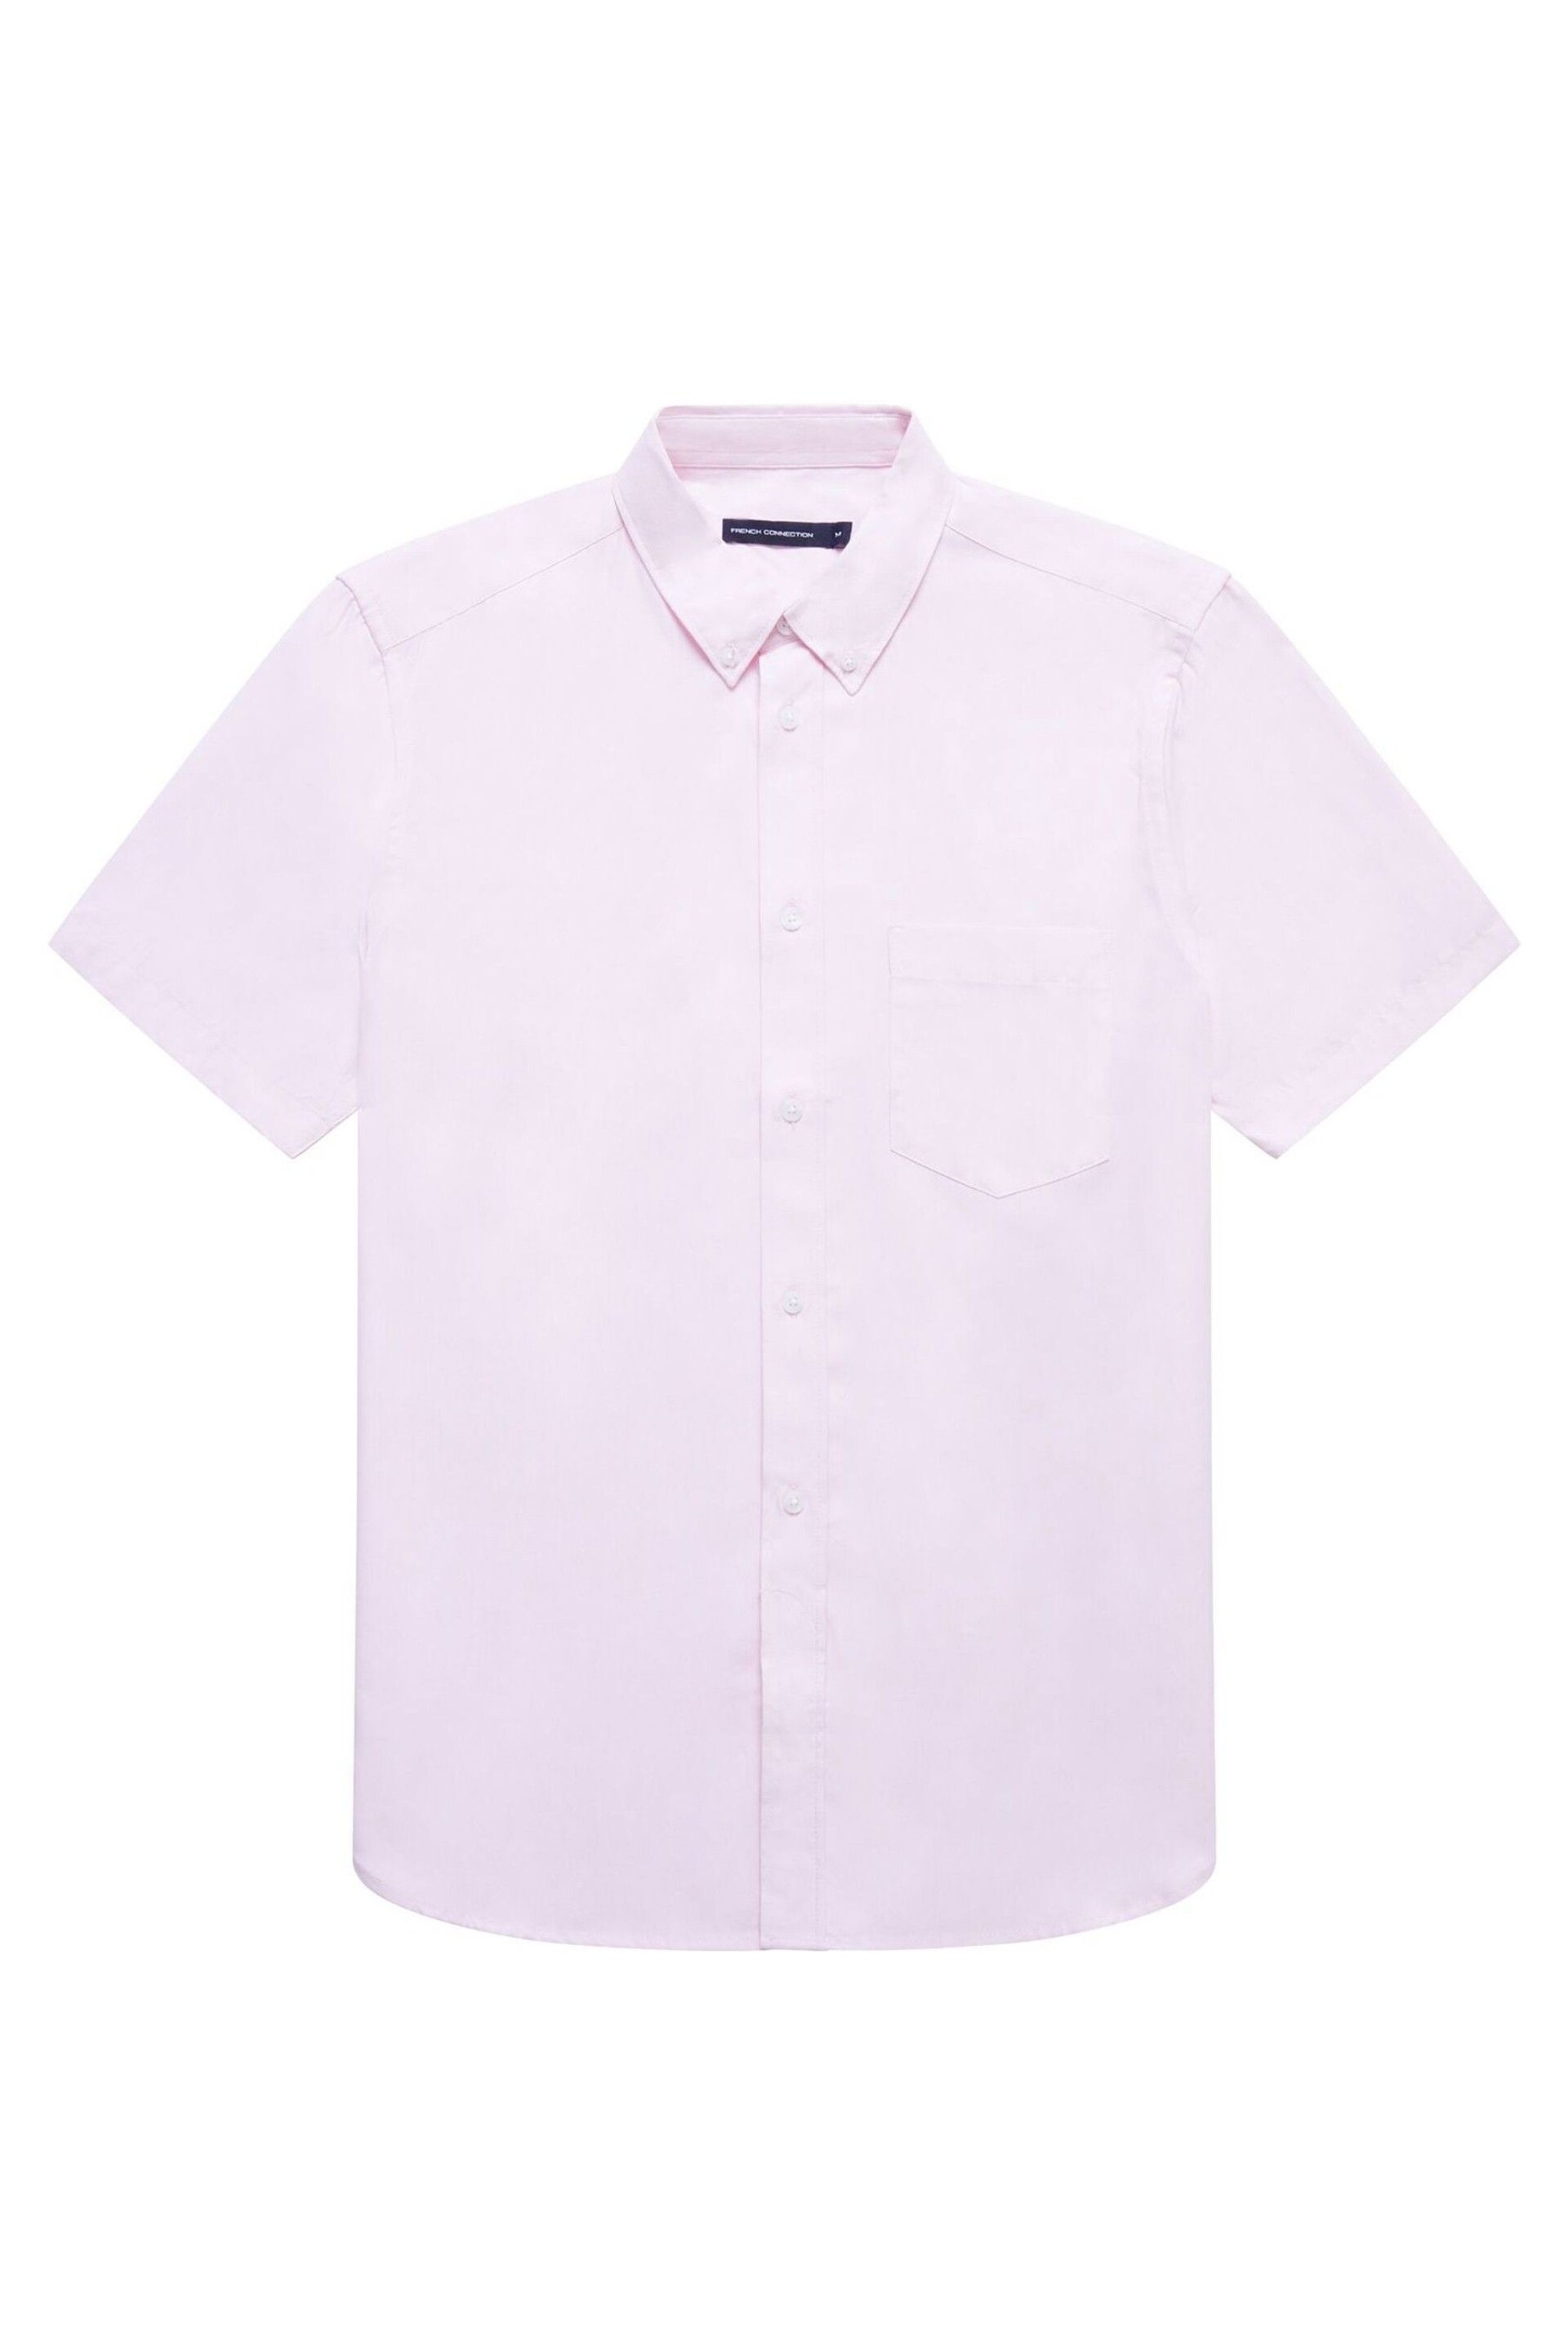 French Connection Oxford Short Sleeve White Shirt - Image 4 of 4